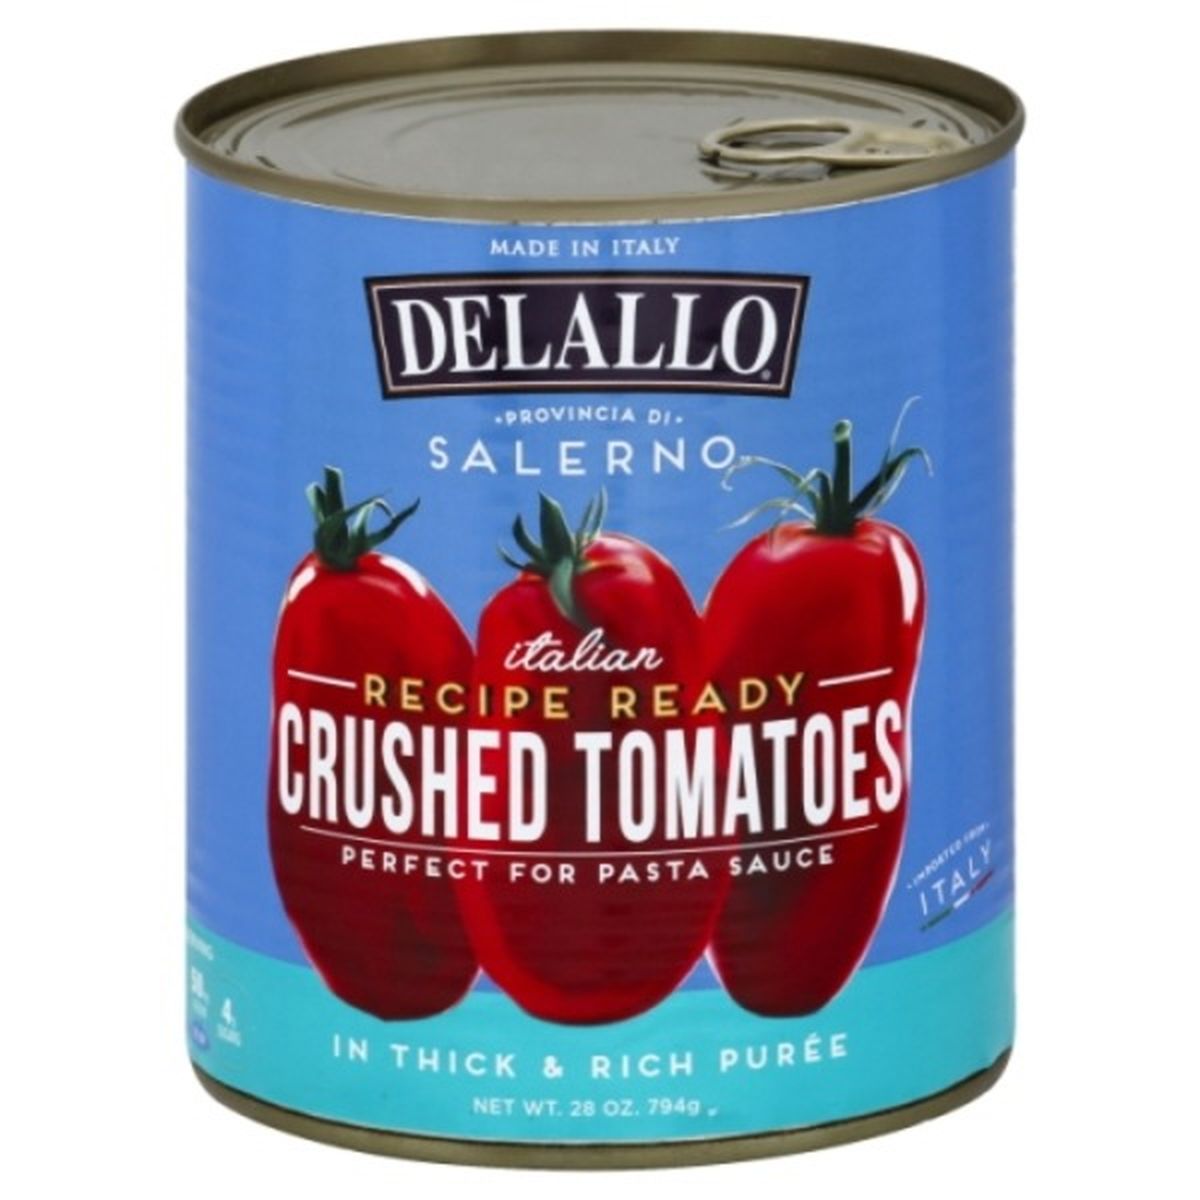 Calories in DeLallo Crushed Tomatoes, Italian